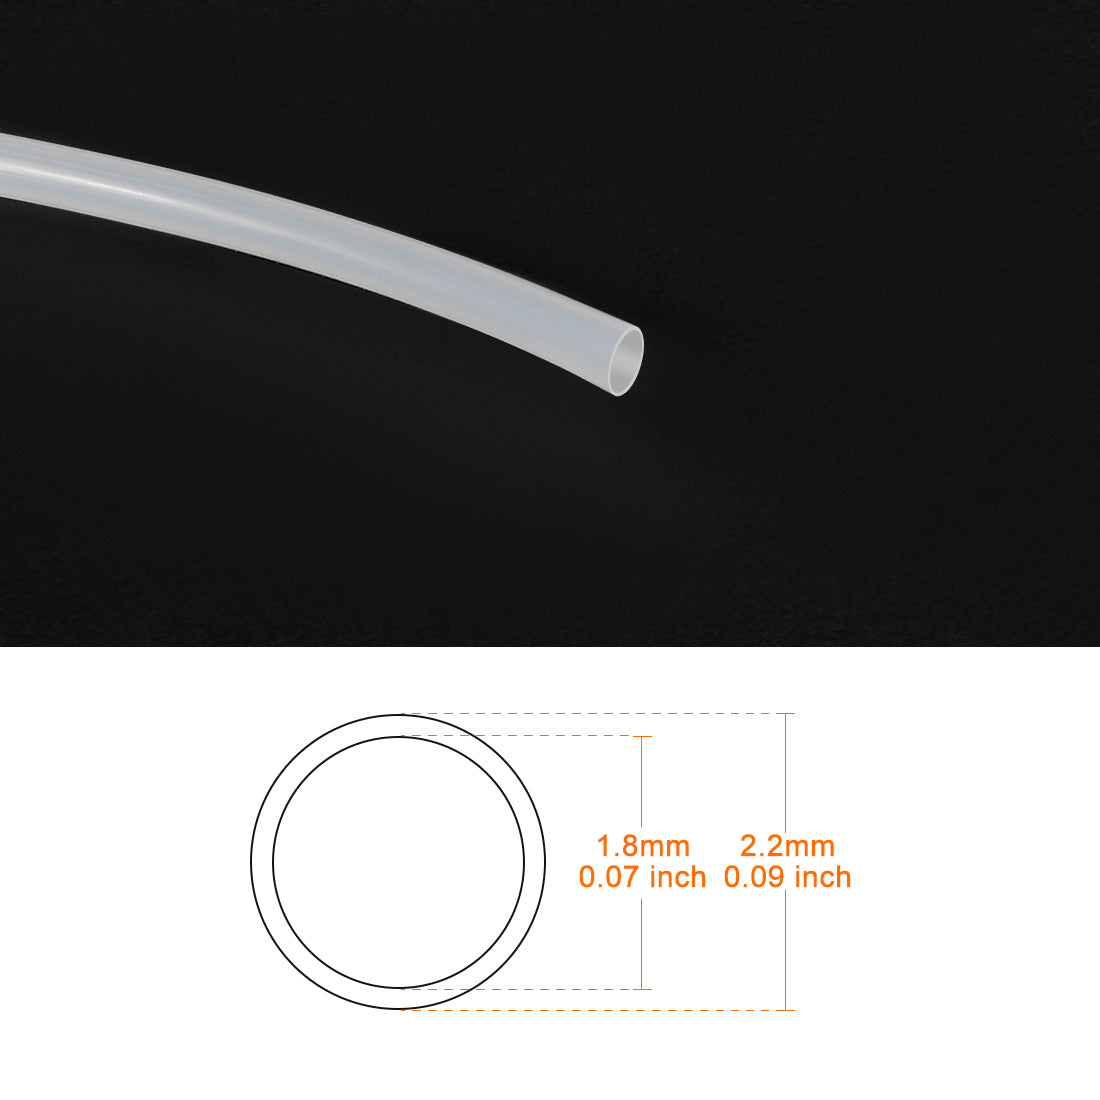 uxcell Uxcell PTFE Tube Tubing 5 Meter 16.4ft Lengh Pipe 1.8mm ID 2.2mm OD for 3D Printer RepRap